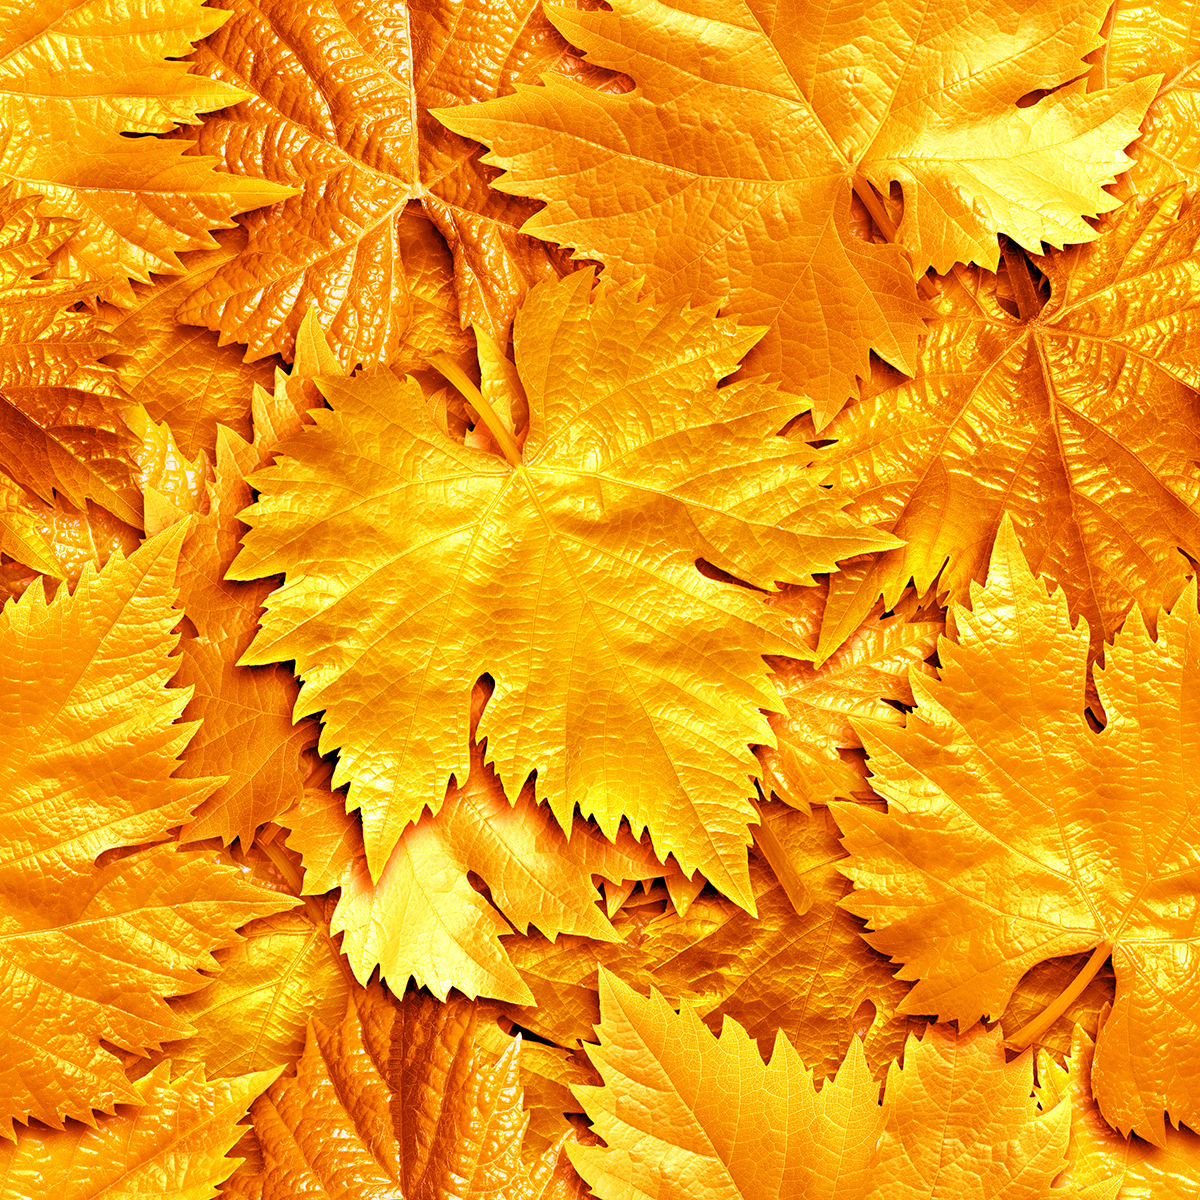 A pile of yellow leaves